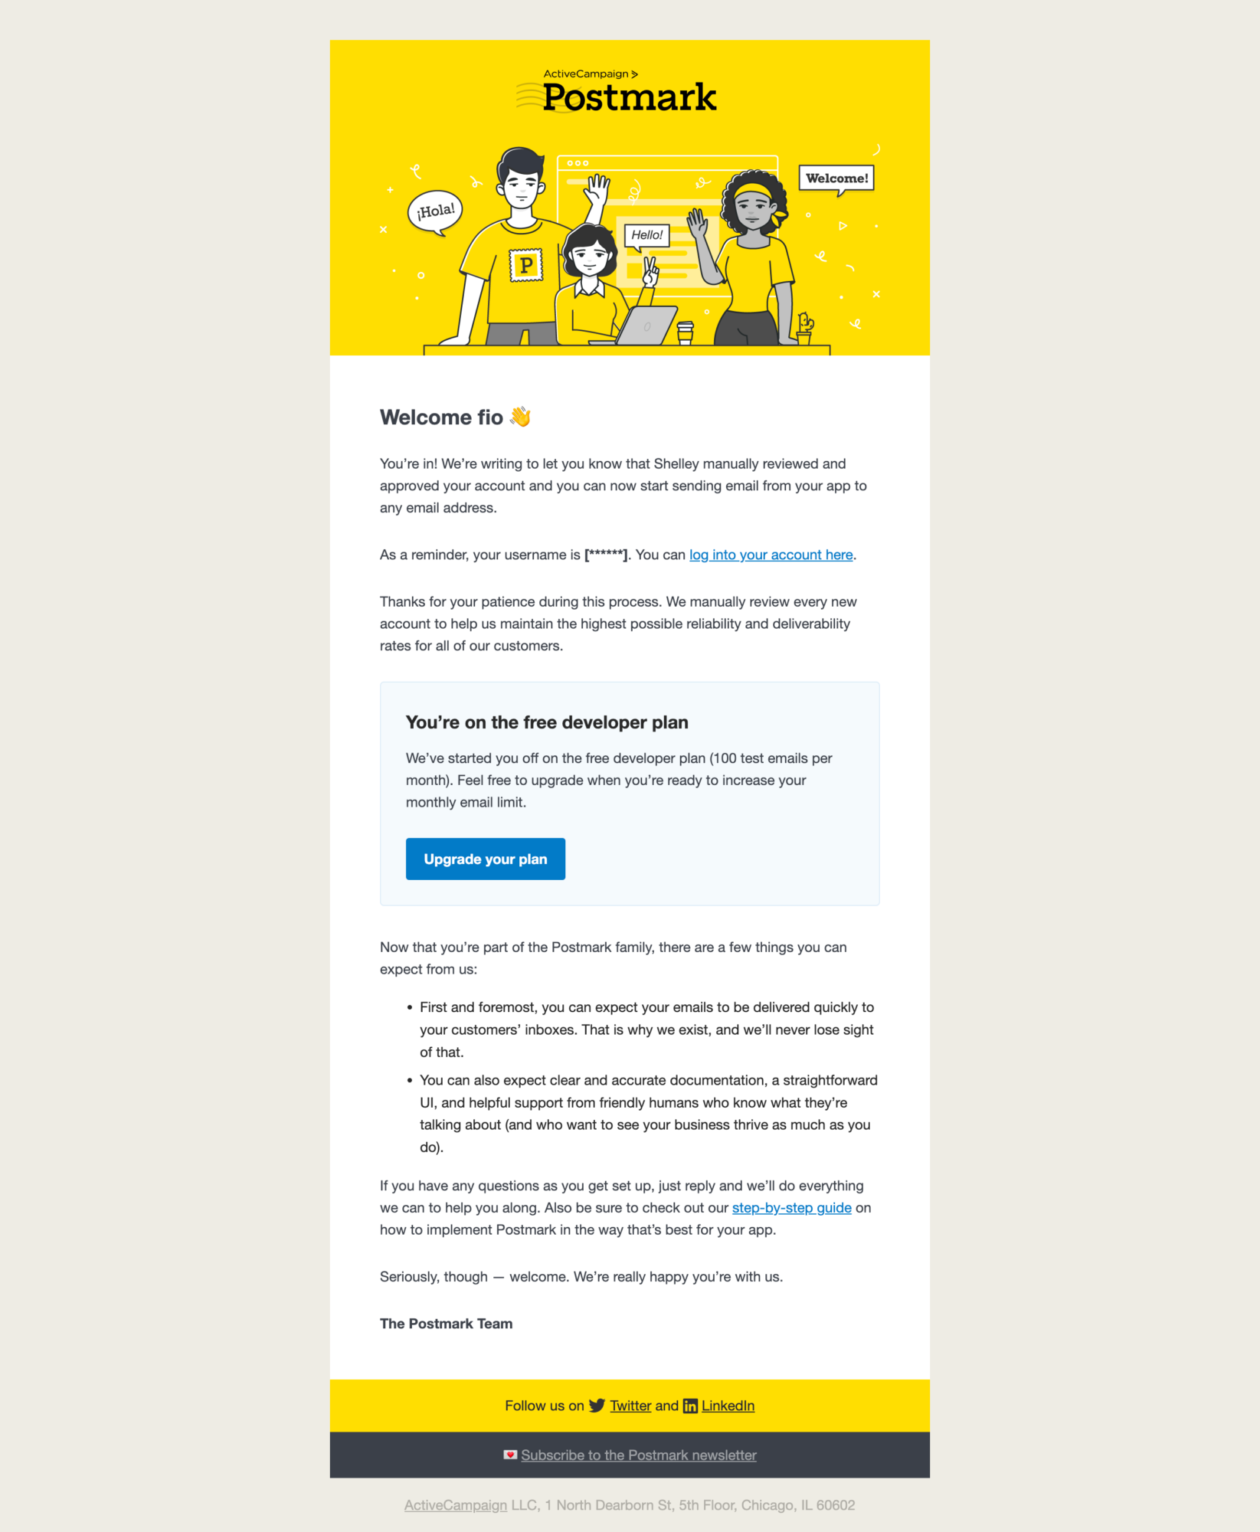 An example of transactional email: a Postmark email welcoming customers to the service